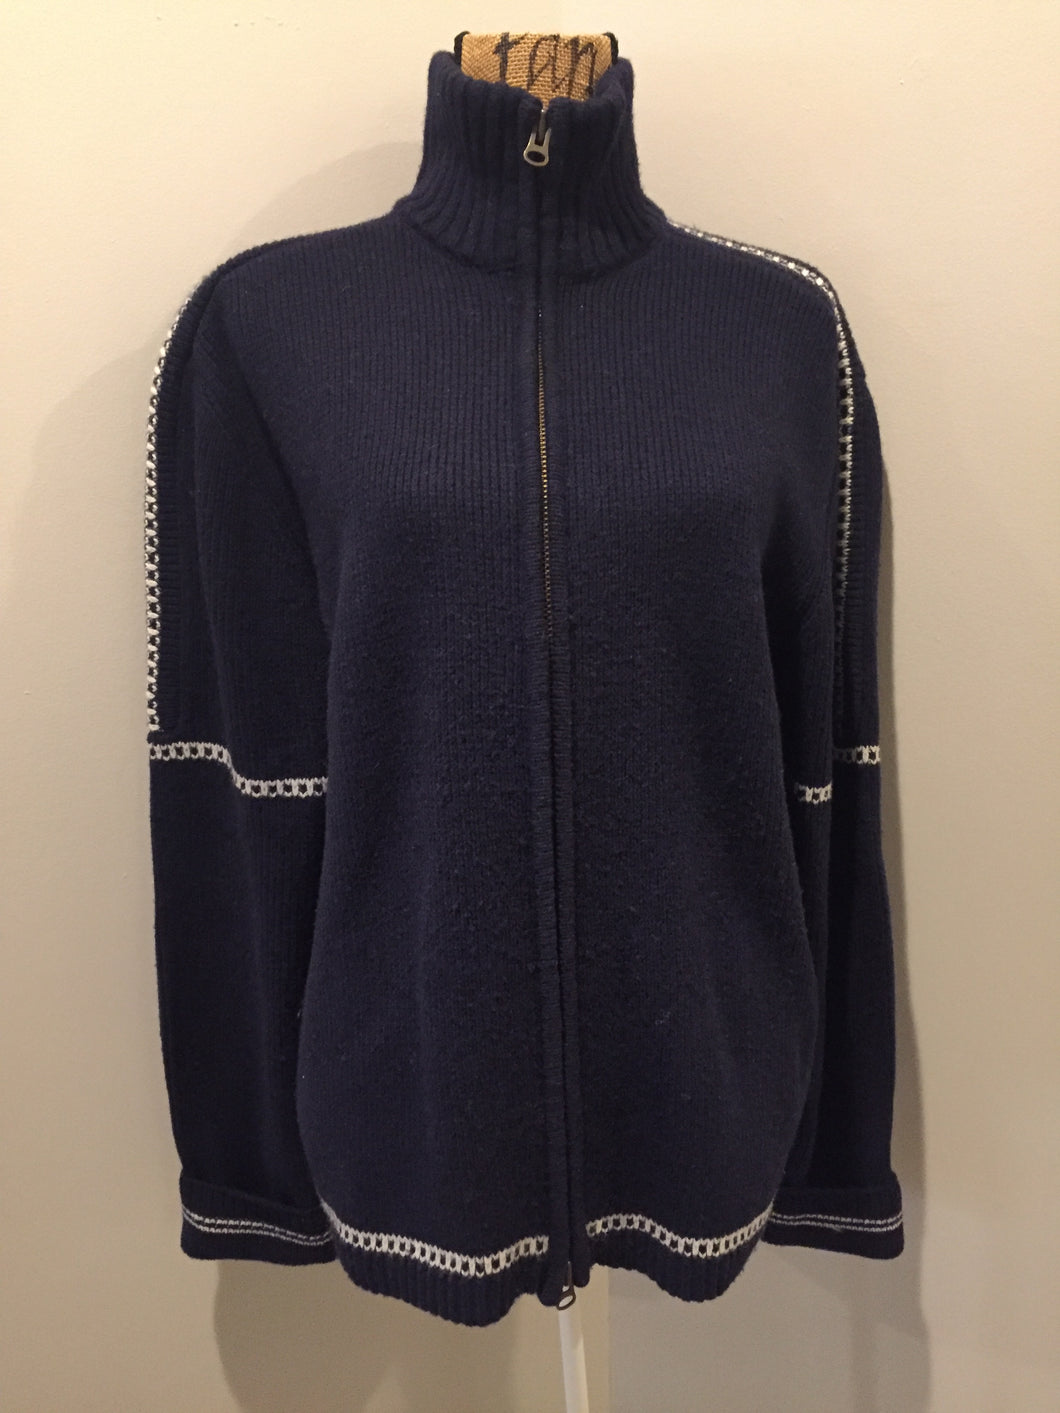 Kingspier Vintage - Gant wool cardigan in navy blue with white stripe around trim and zipper closure. Size large.